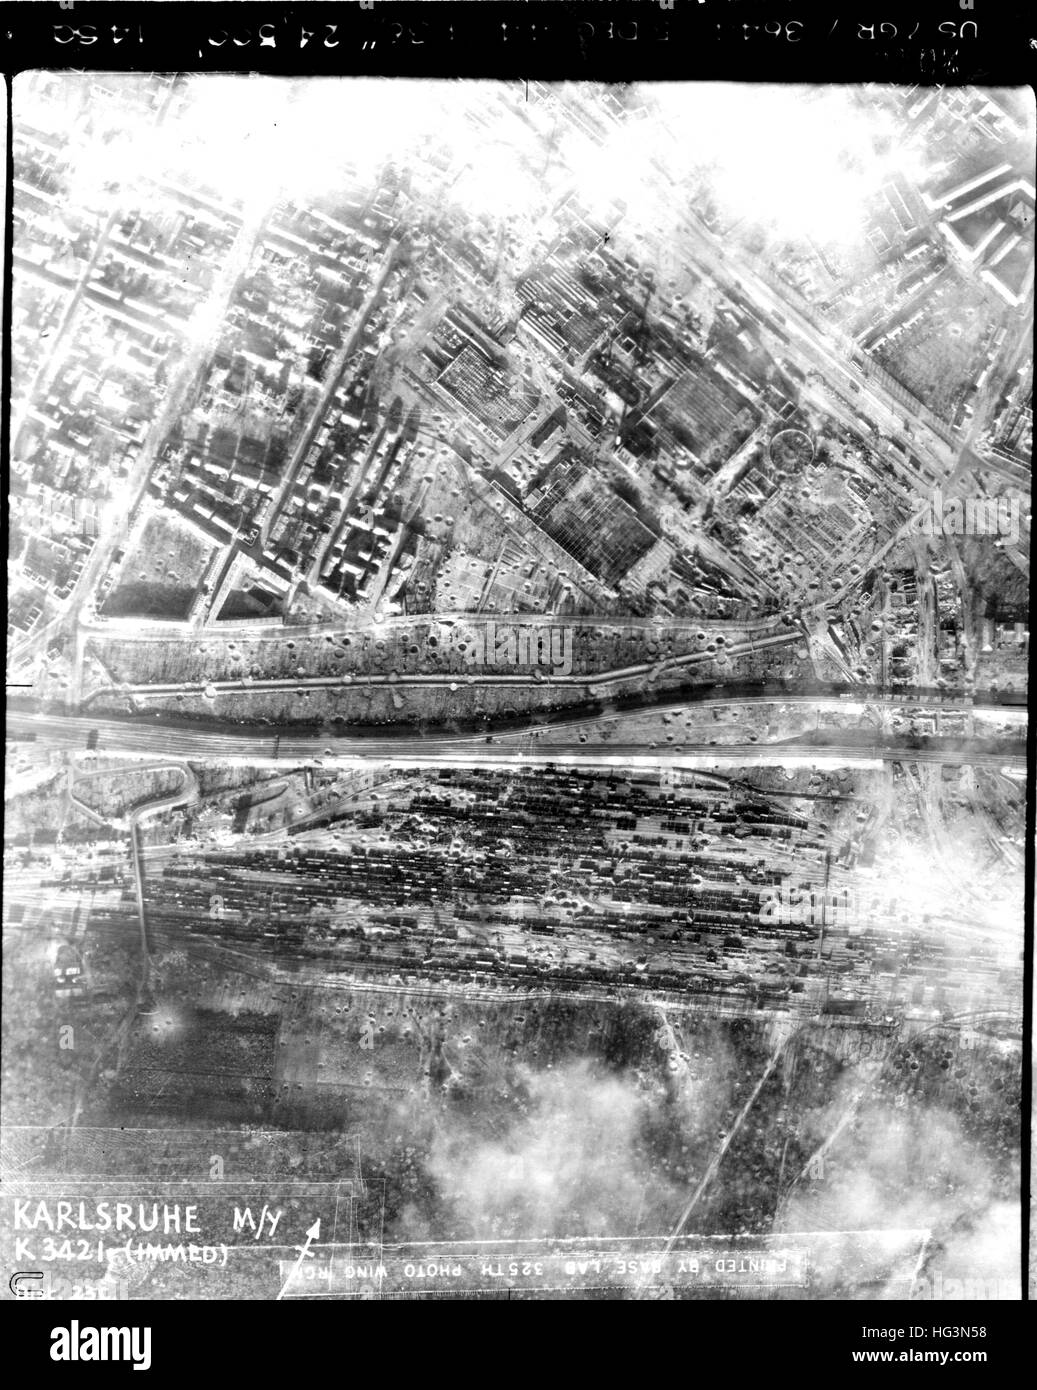 KARLSRUHE, Germany. Reconnaissance photo from a Spitfire of 542 Squadron RAF taken on 5 December 1944 showing extensive bomb damage  area around the main railway station in the lower half of the image. Stock Photo